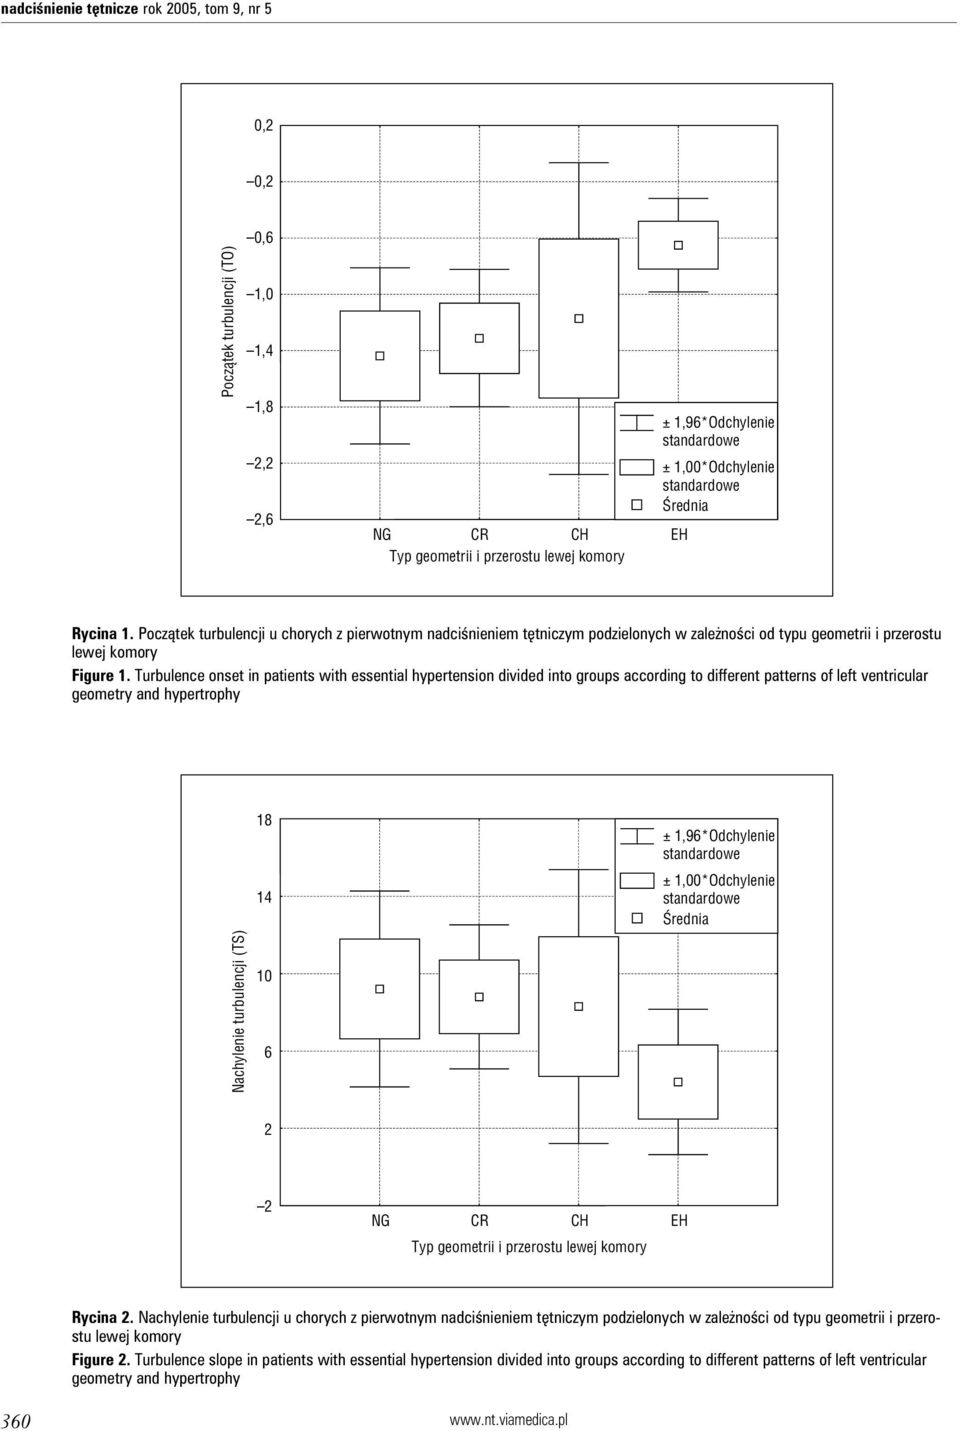 Turbulence onset in patients with essential hypertension divided into groups according to different patterns of left ventricular geometry and hypertrophy 18 14 ± 1,96*Odchylenie ± 1,00*Odchylenie